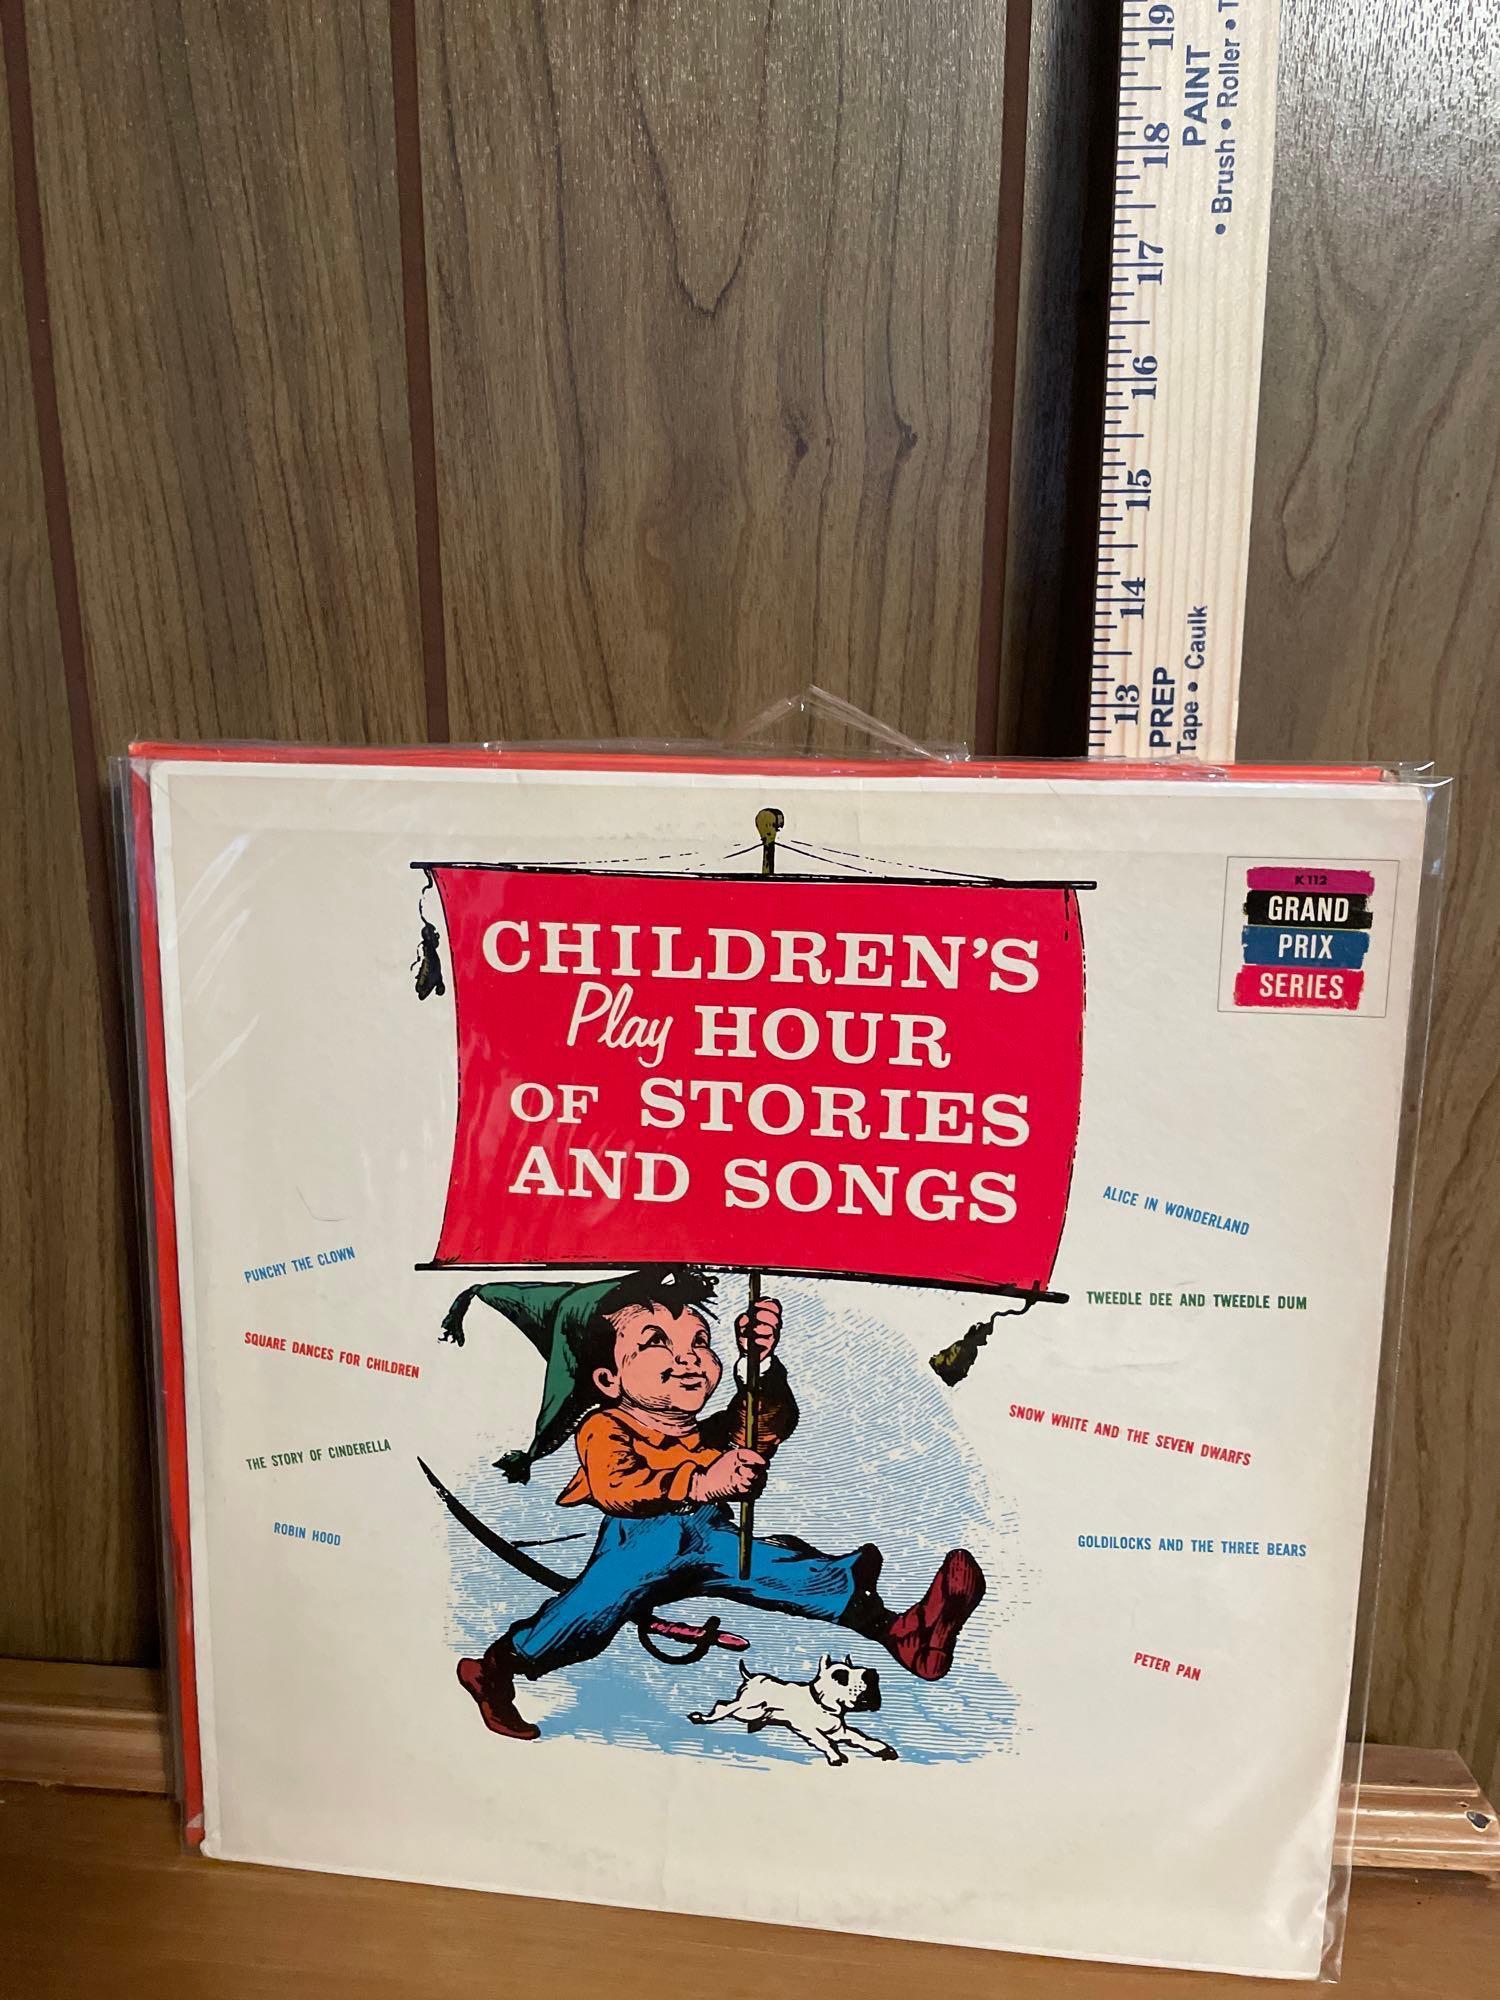 (26) Vintage Christmas and Misc Vinyl Records